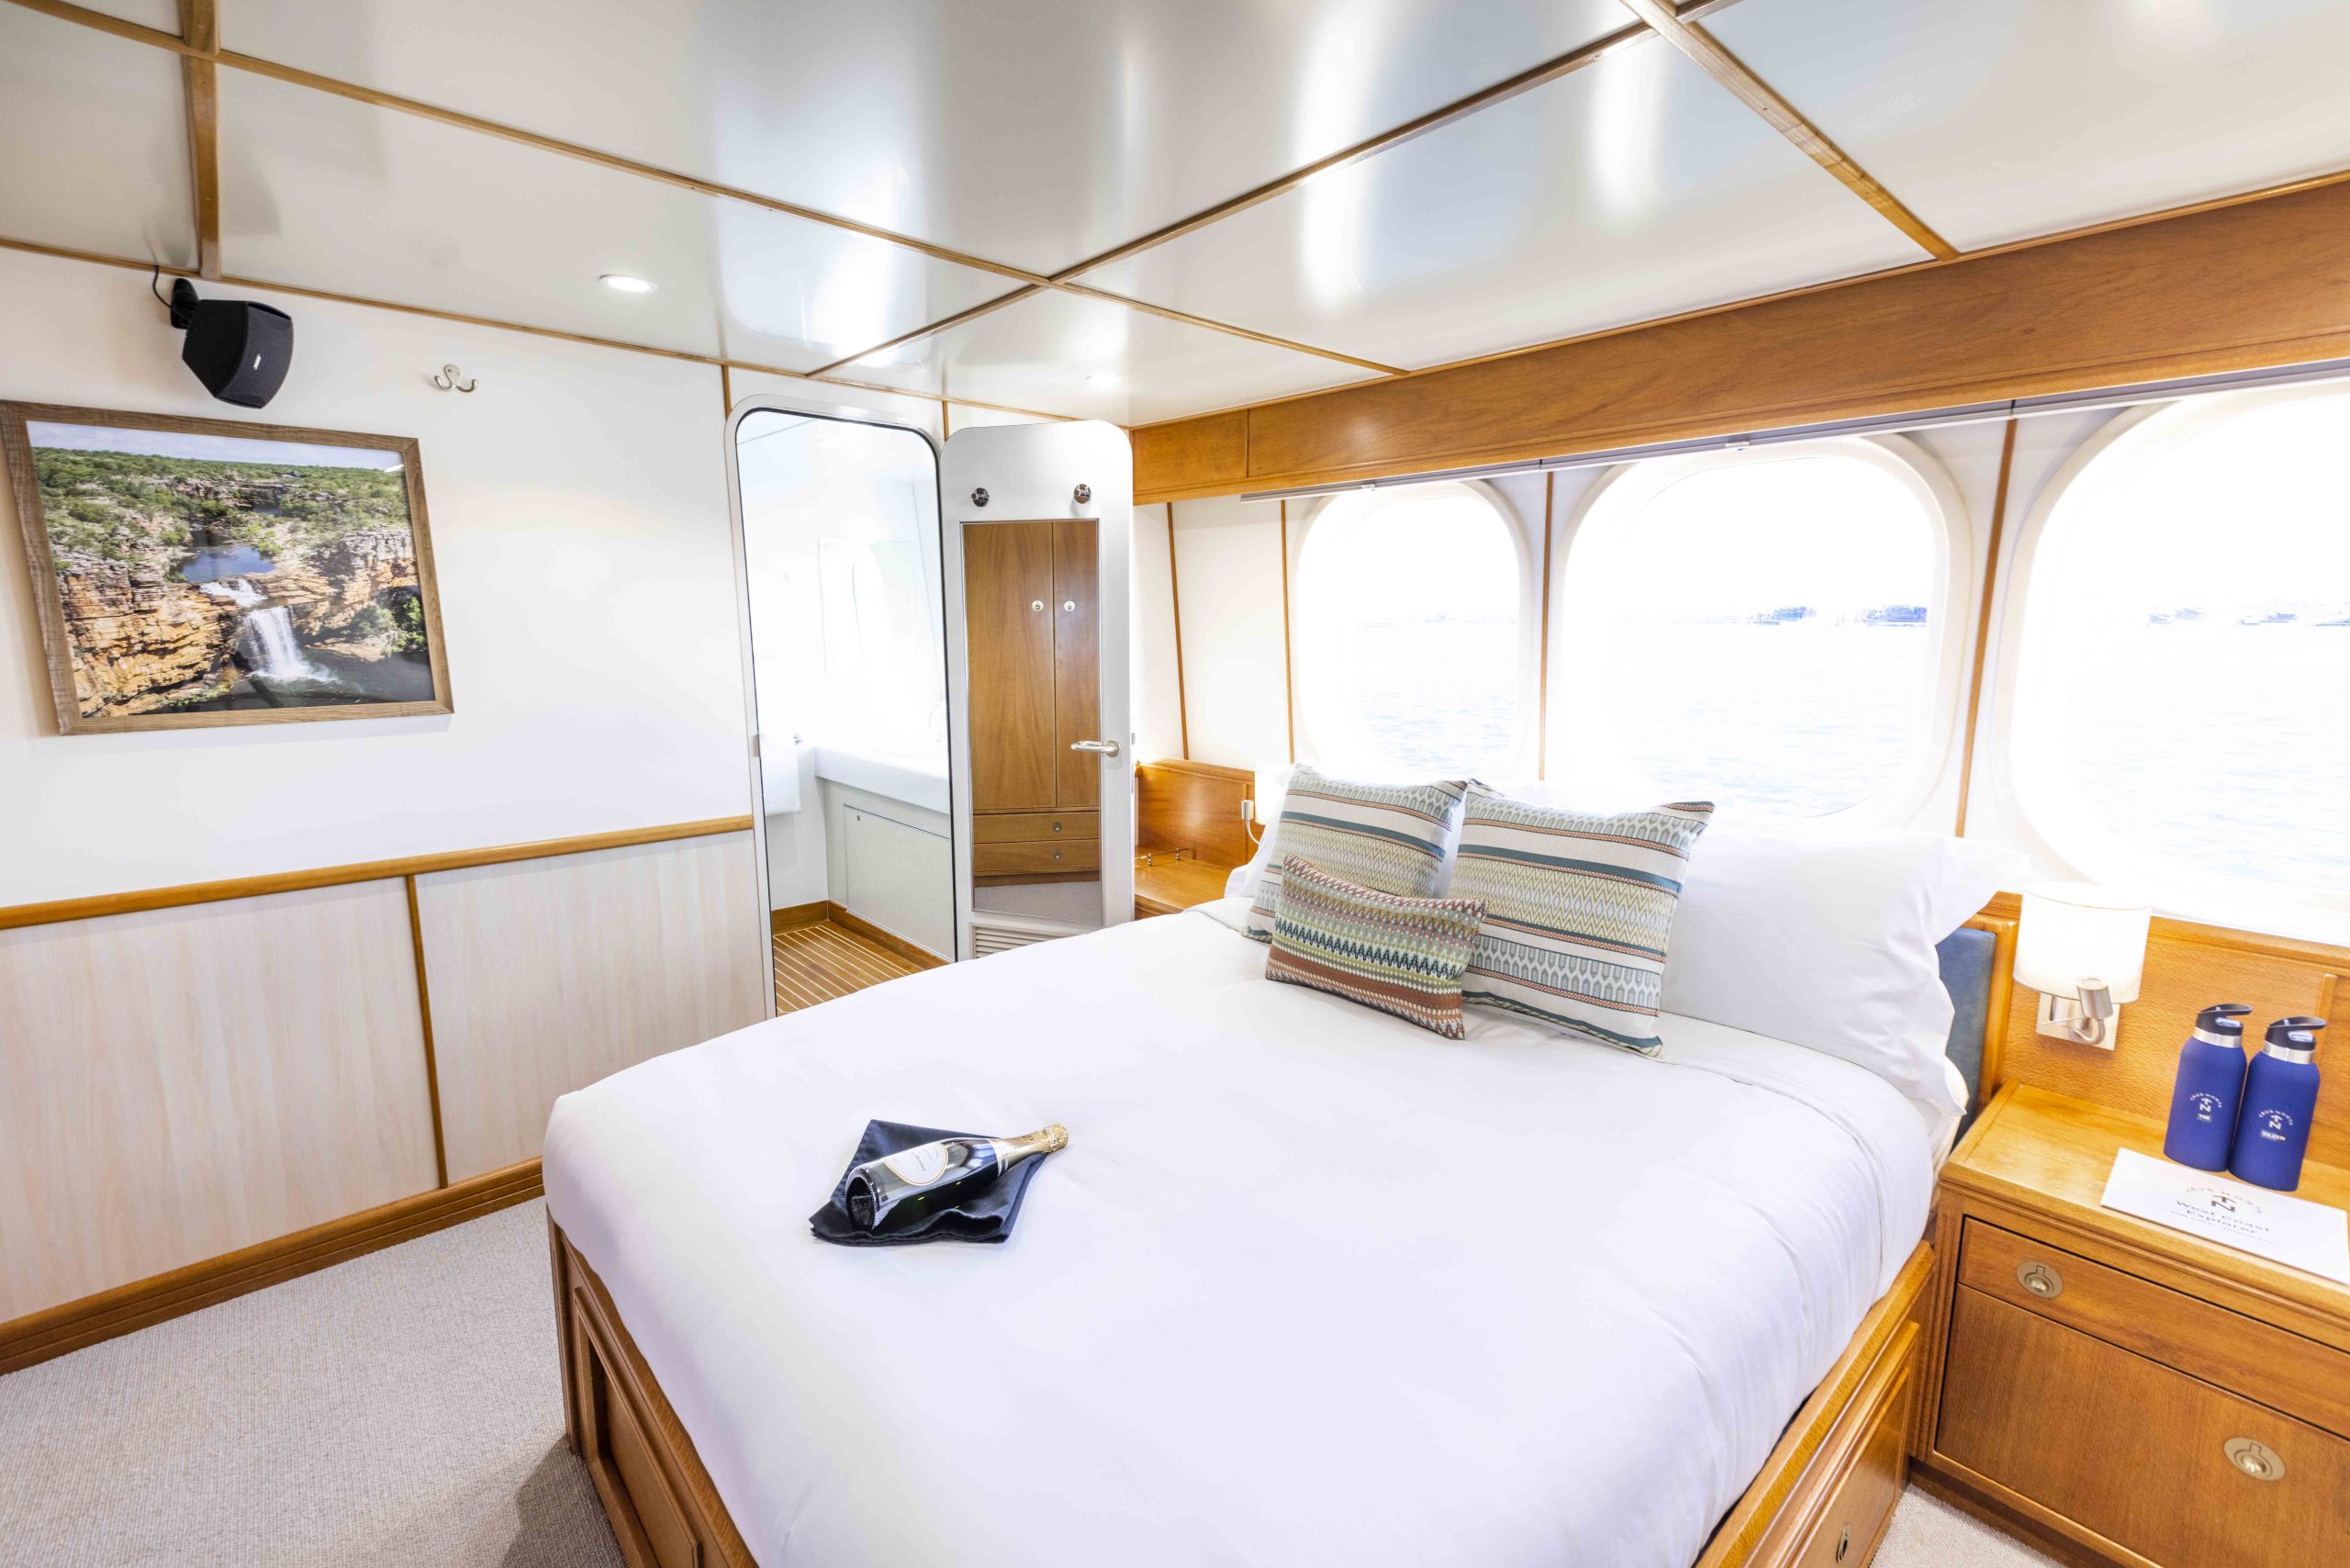 Explorer Class staterooms feature a free standing queen size bed and a twin basin en-suite